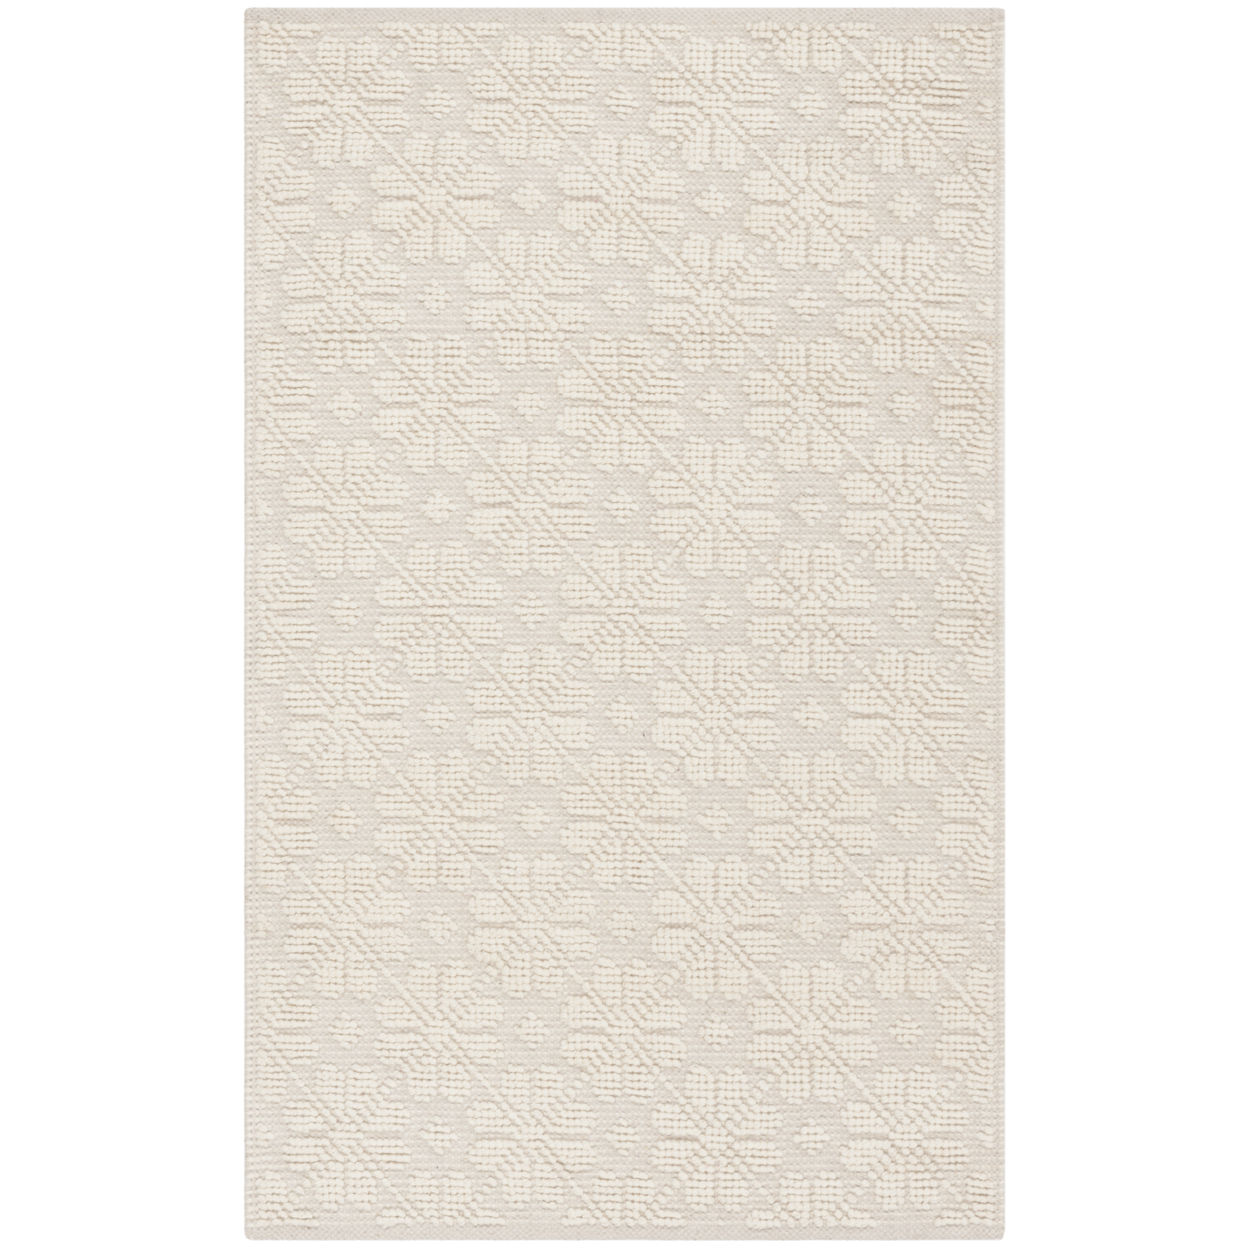 SAFAVIEH Vermont Collection VRM106A Handwoven Ivory Rug - 2-3 X 4